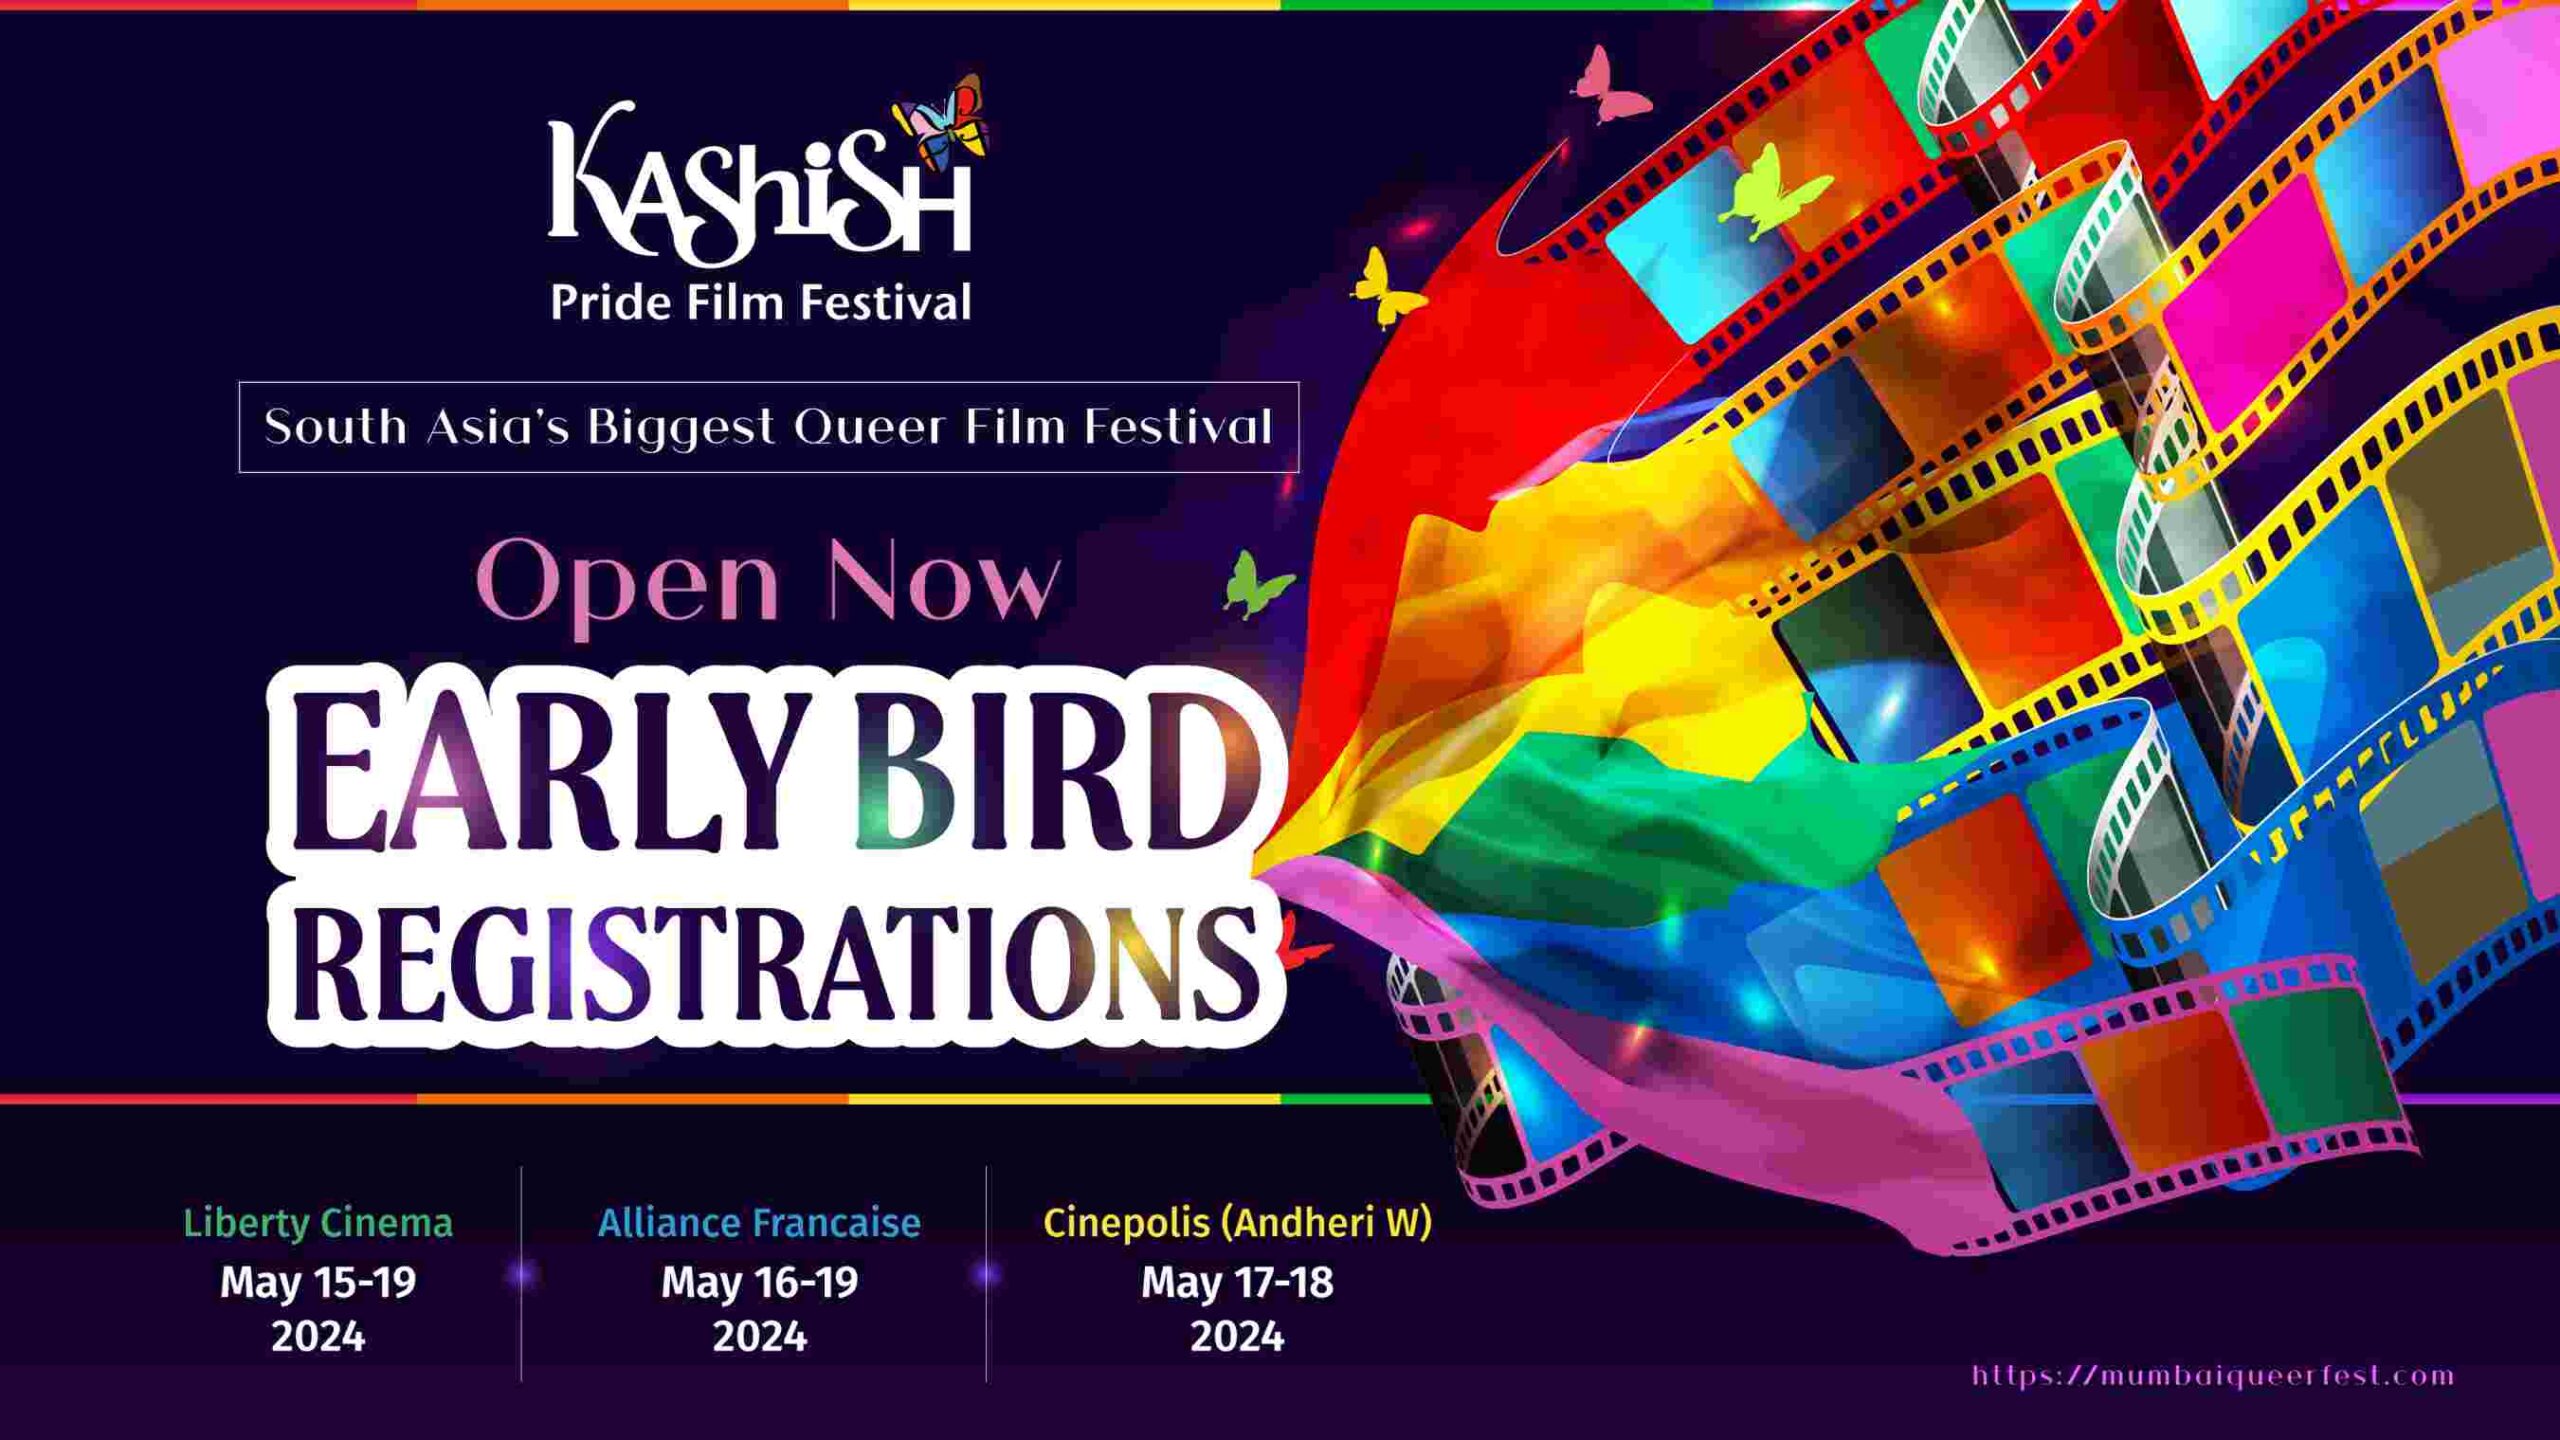 Kashish 2024 Early Bird Registrations will close in 2 days